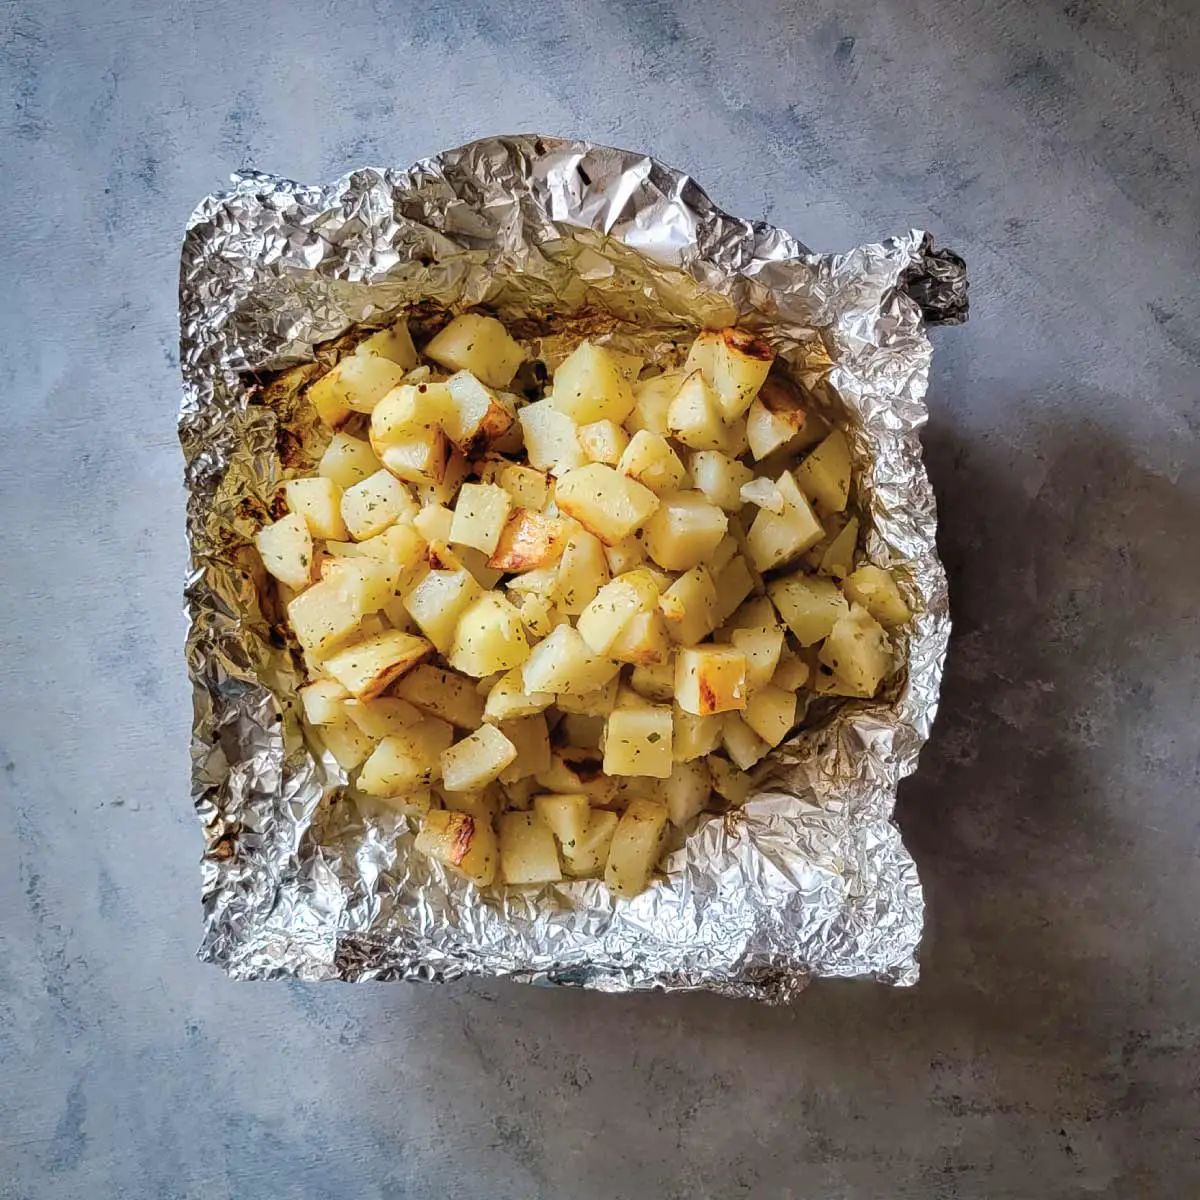 Grilled Ranch Potatoes in Foil Packs